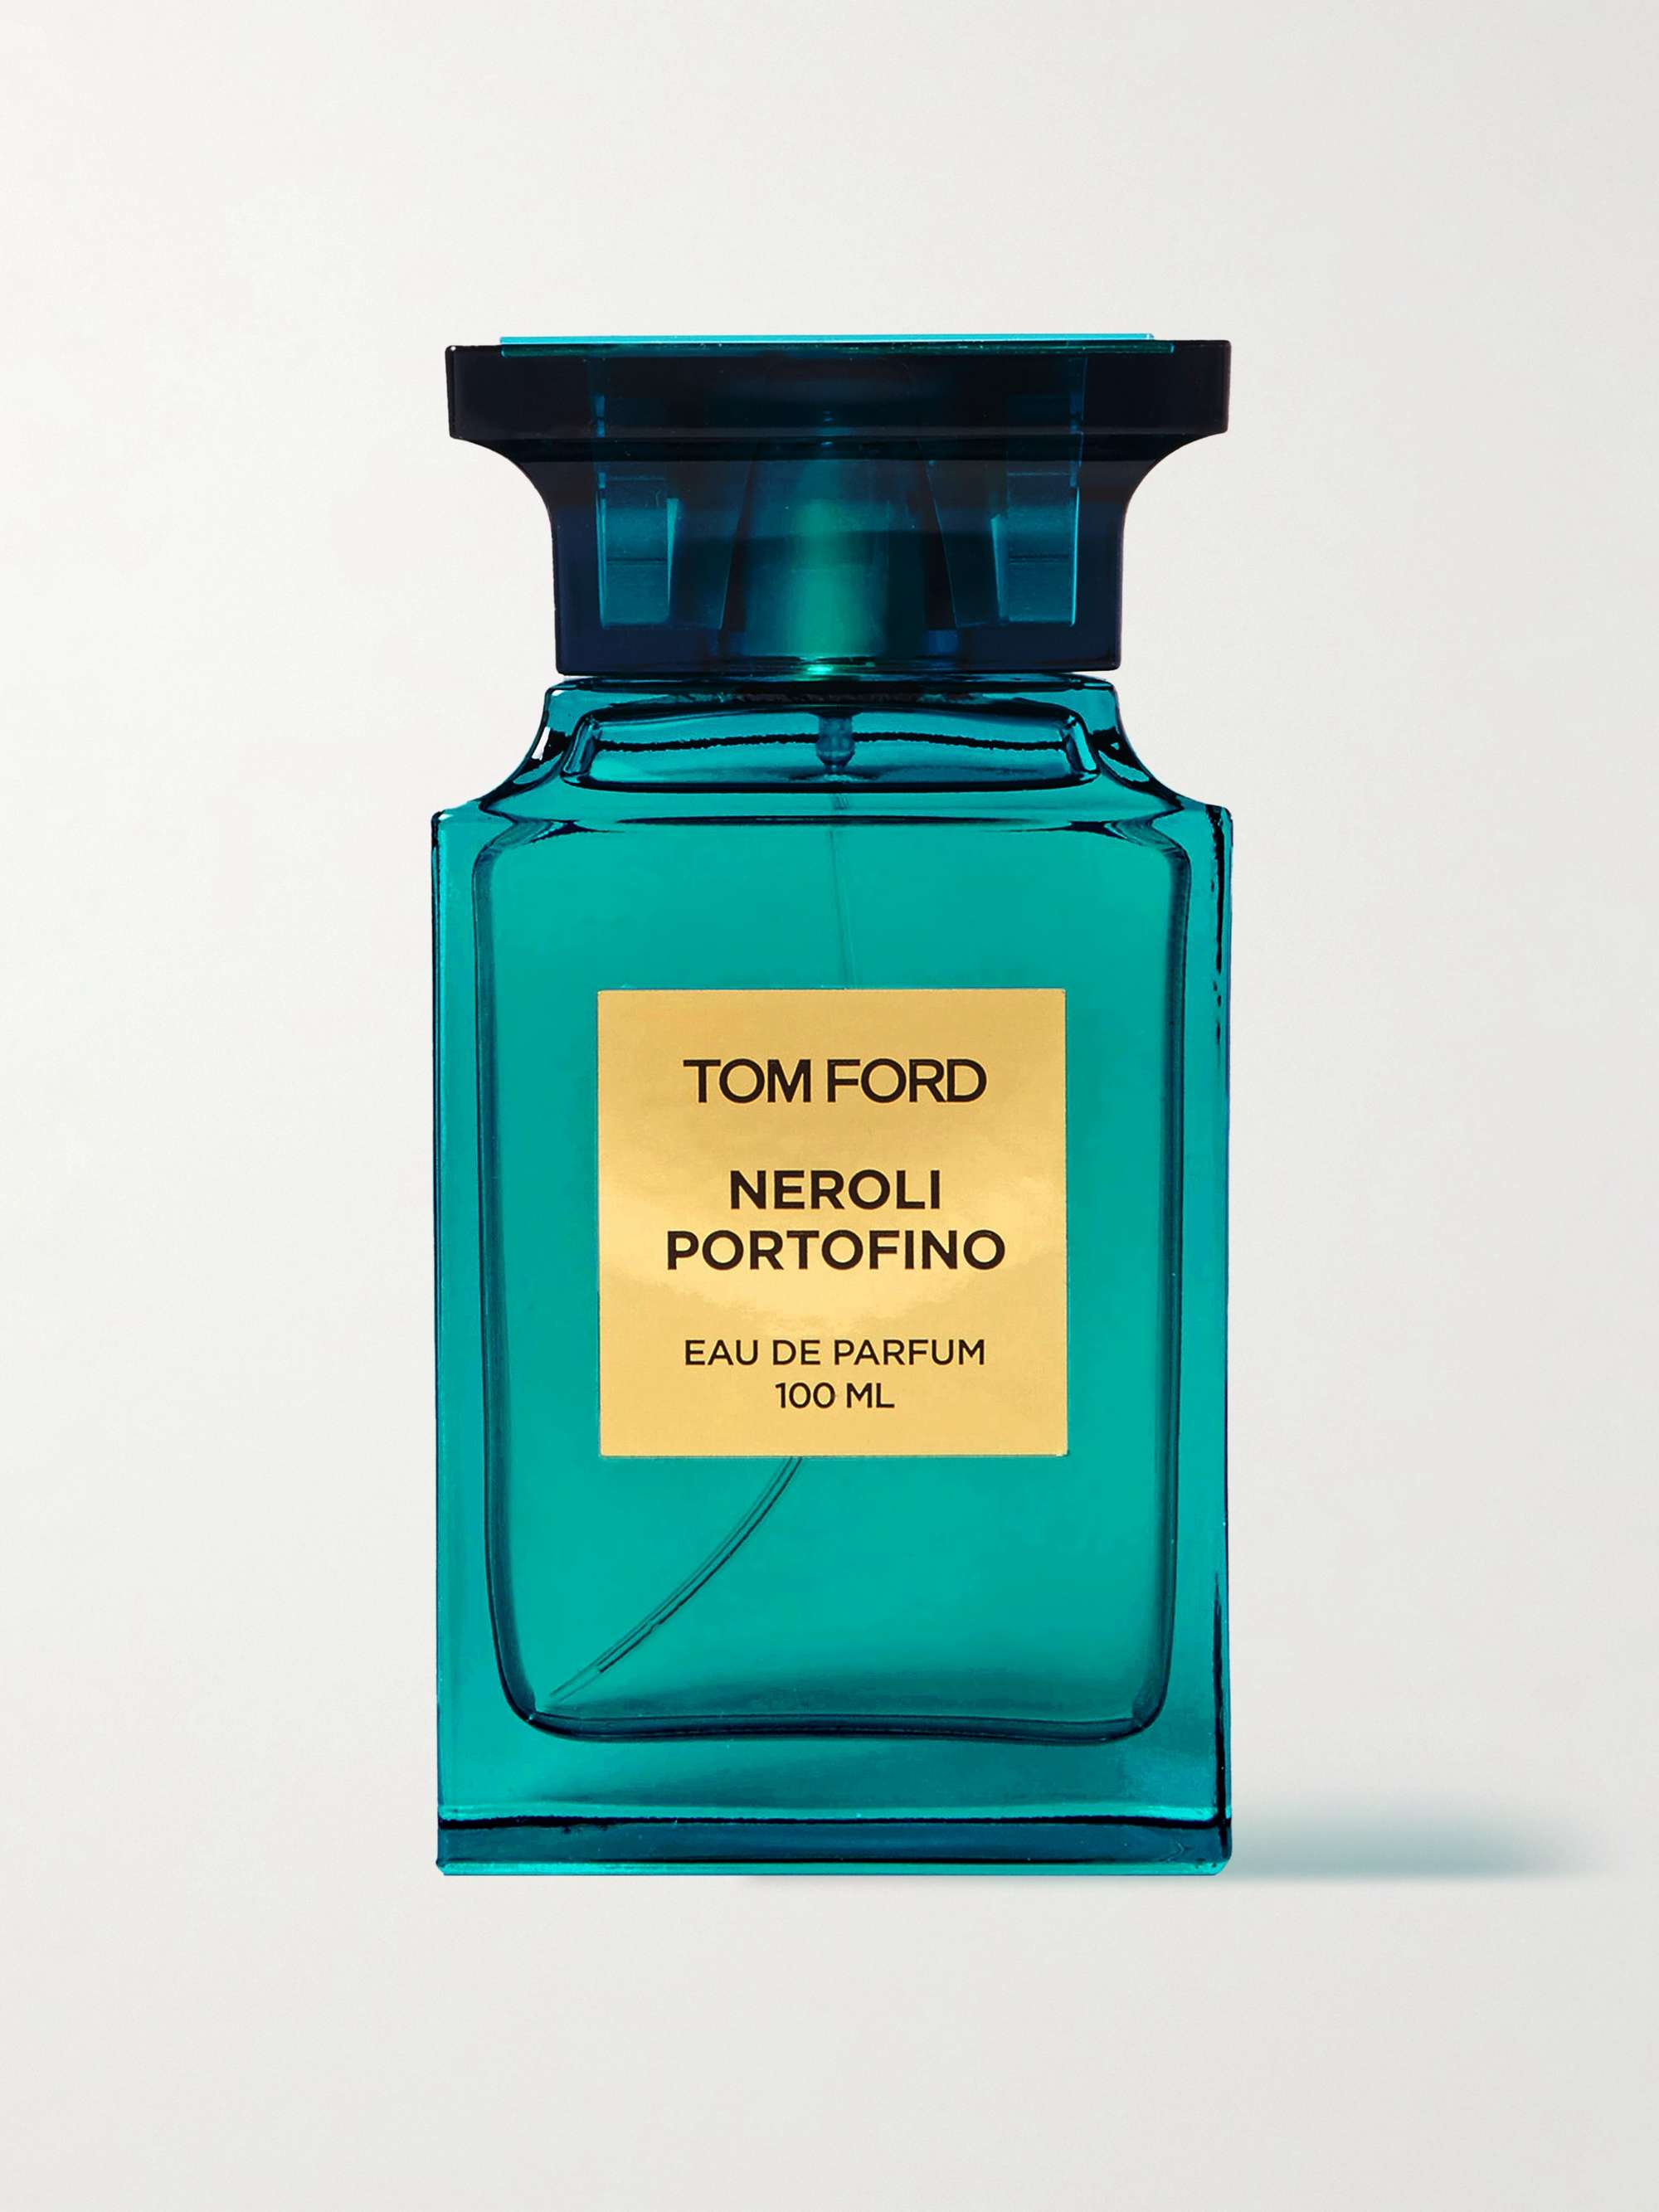 TOM FORD BEAUTY